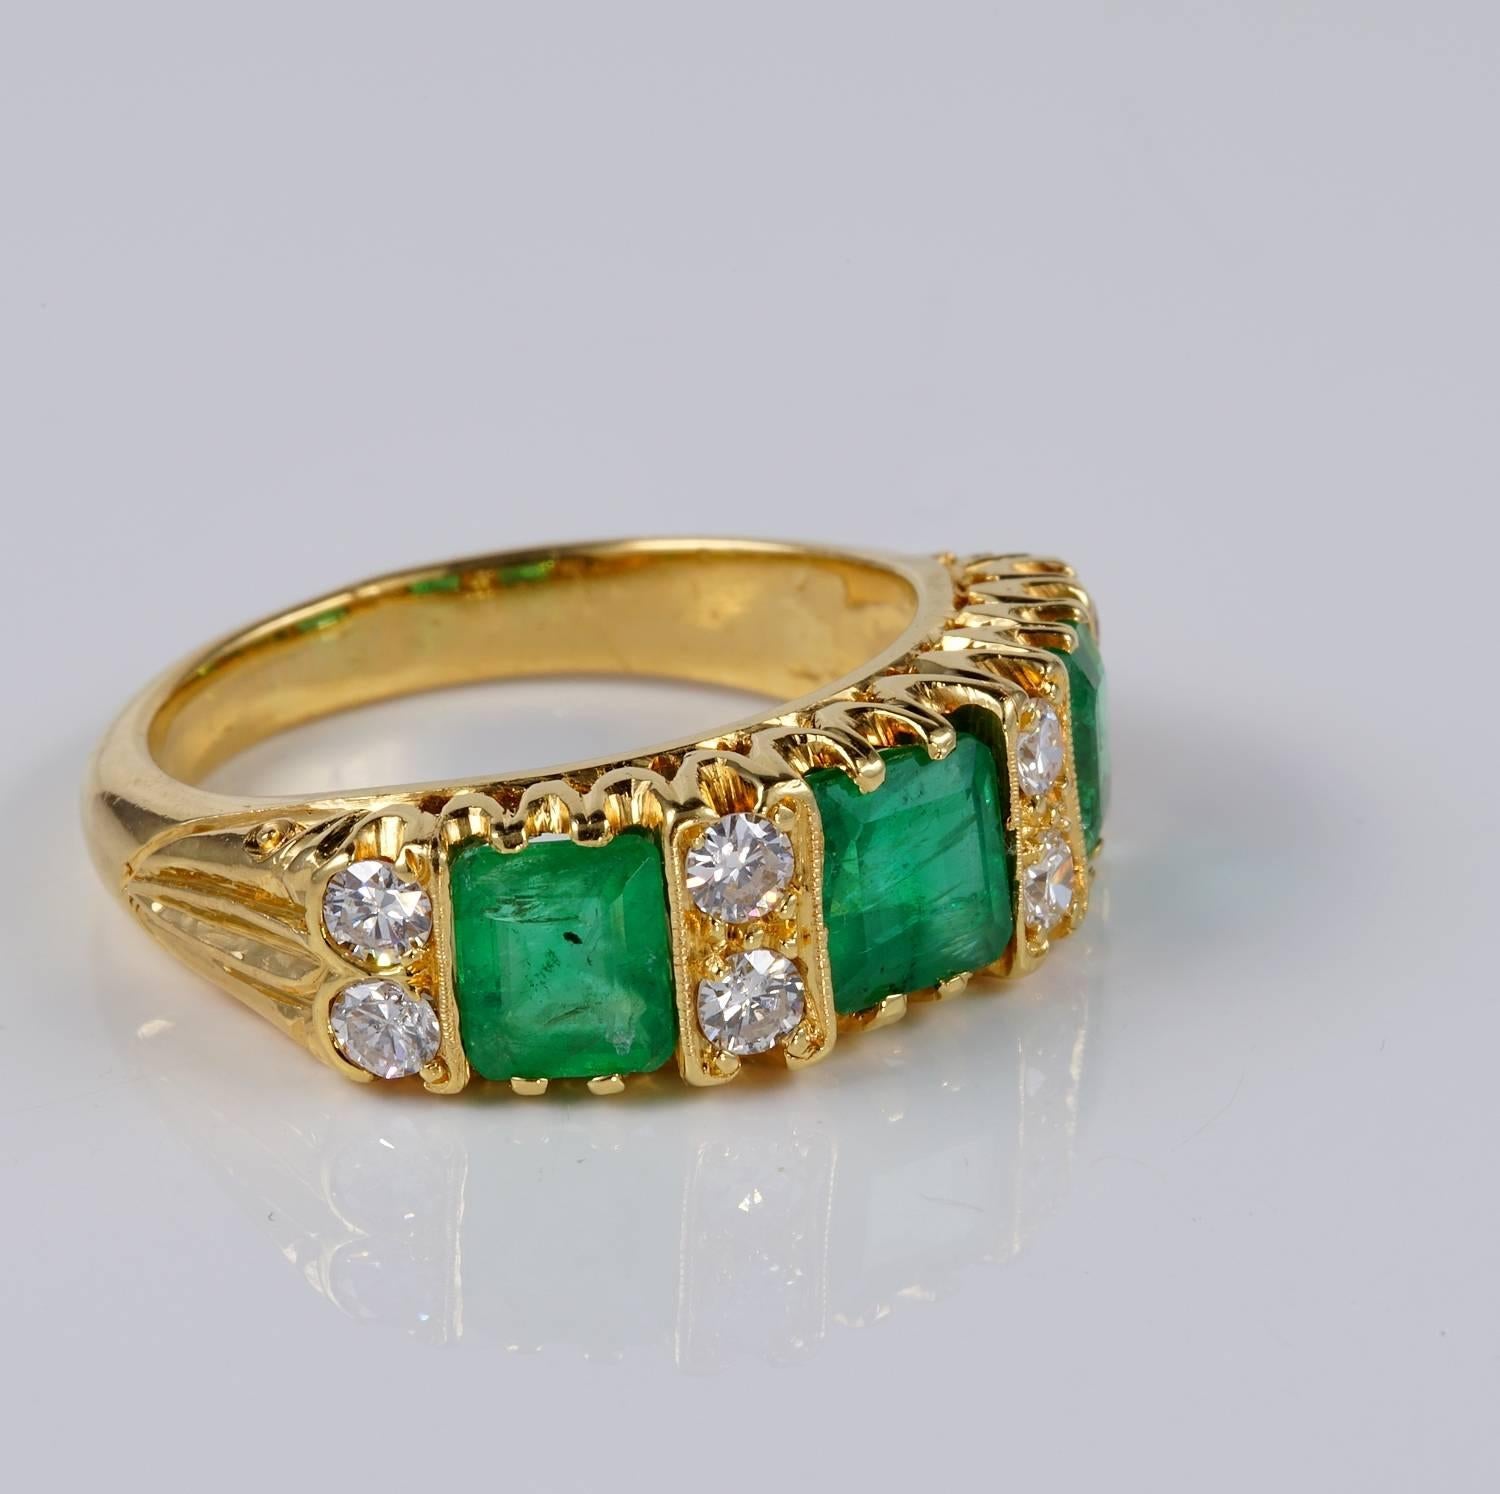 Here is one truly fantastic genuine late Art Deco Diamond & Colombian Emerald trilogy ring dating back to 1935
A classy example from the period very distinctive and sought after
Ring is fully hand crafted of solid 18 KT yellow gold, it bears several